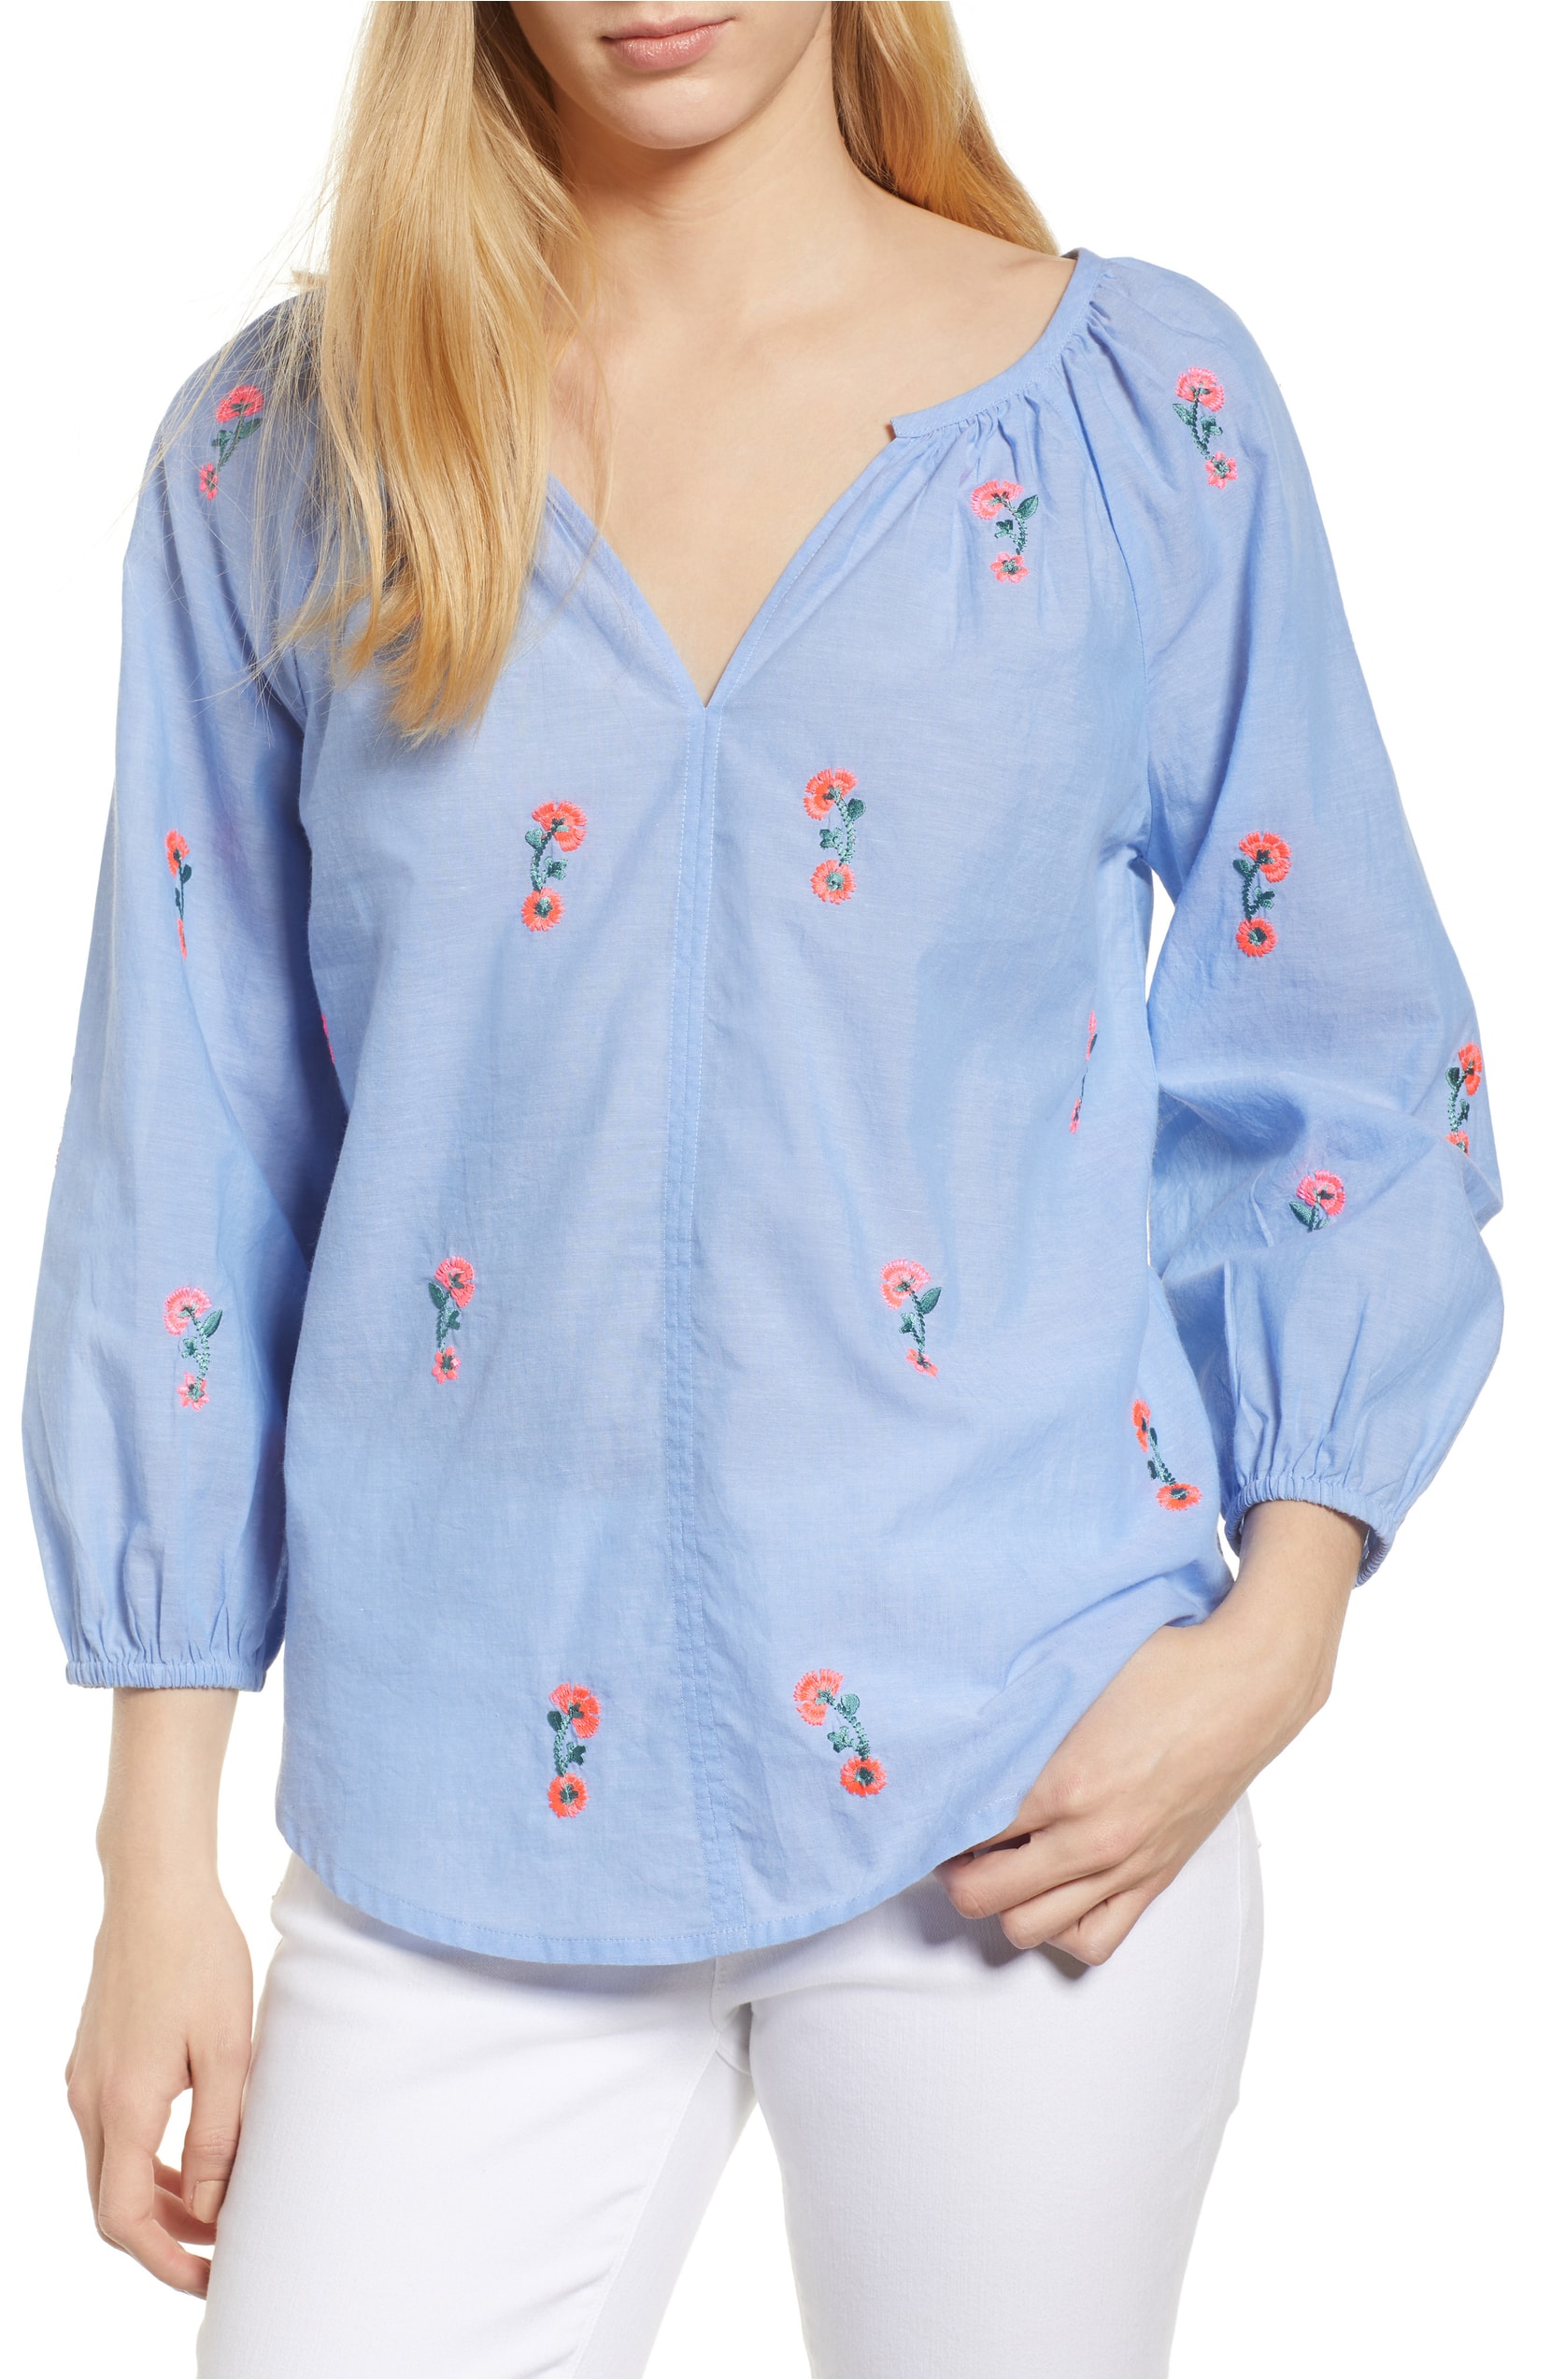 Blue Embroidered Cotton Peasant Blouse Floral